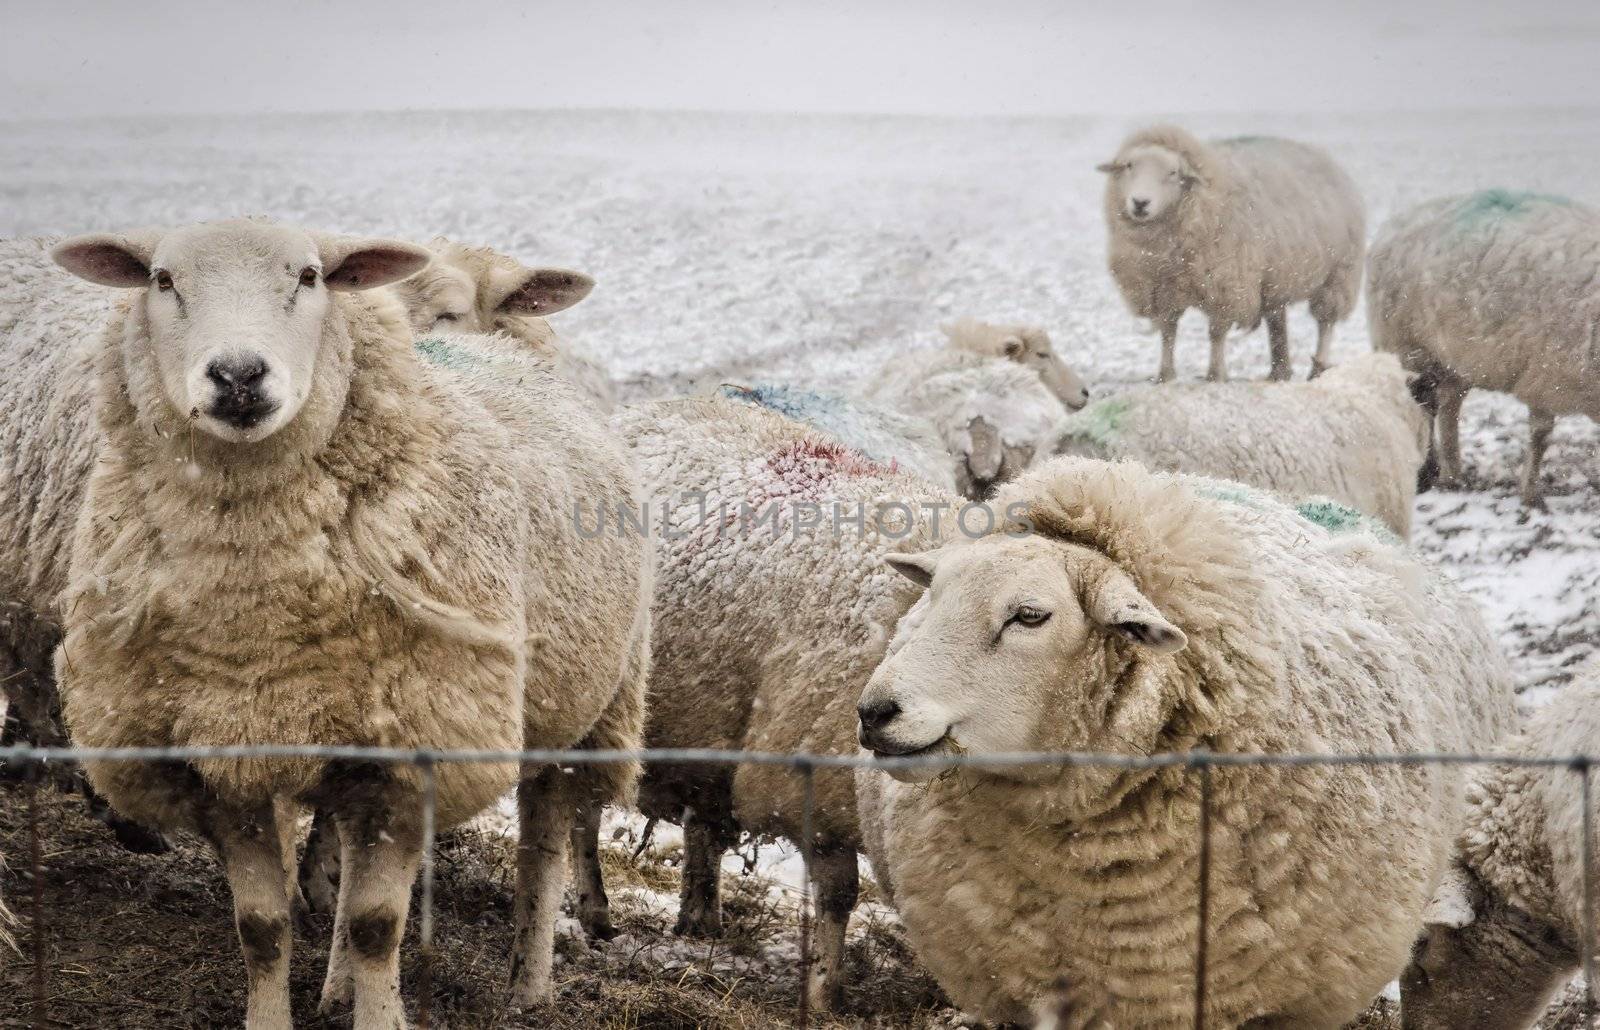 Sheep huddle near the fence in a snow covered field